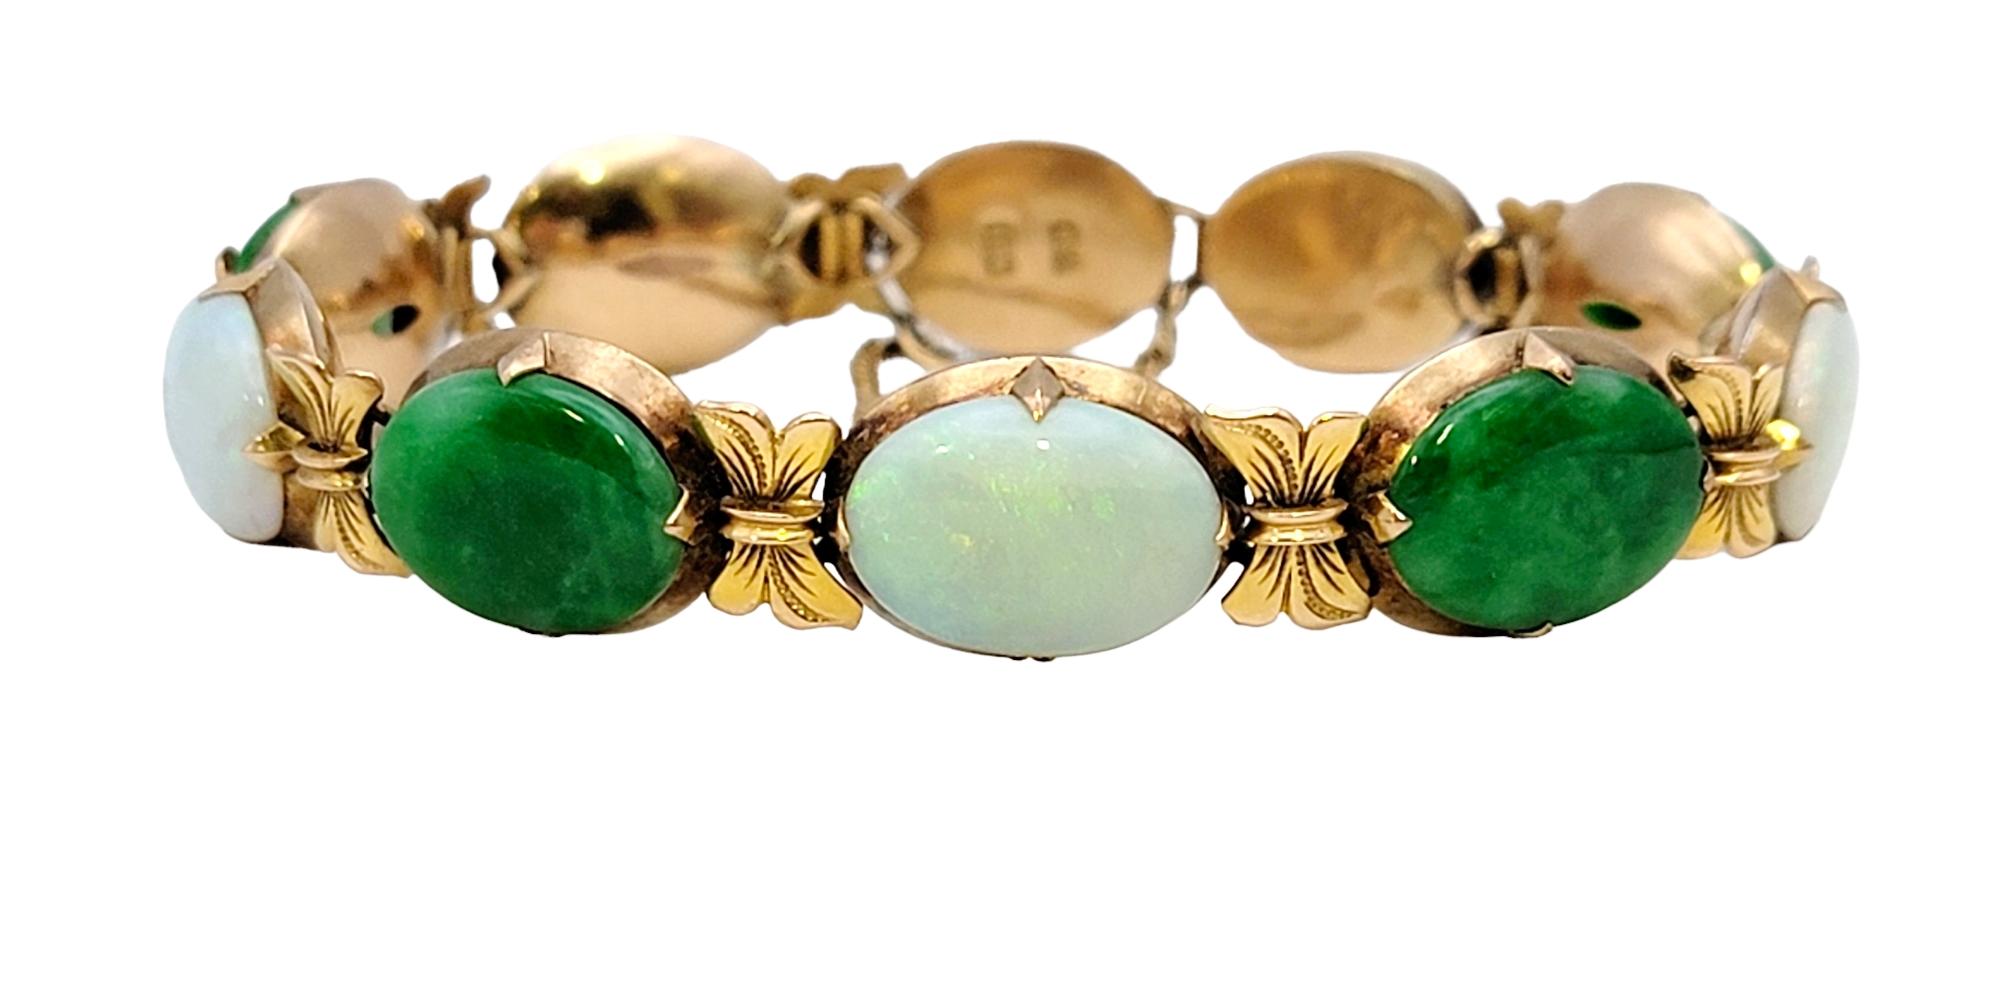 We are absolutely in love with this vintage gem! The incredible rich colors, fine detailing and Old World charm make this stunning bracelet a true keepsake. 

This lovely line bracelet features 4 oval cabochon jade stones and 4 oval cabochon white